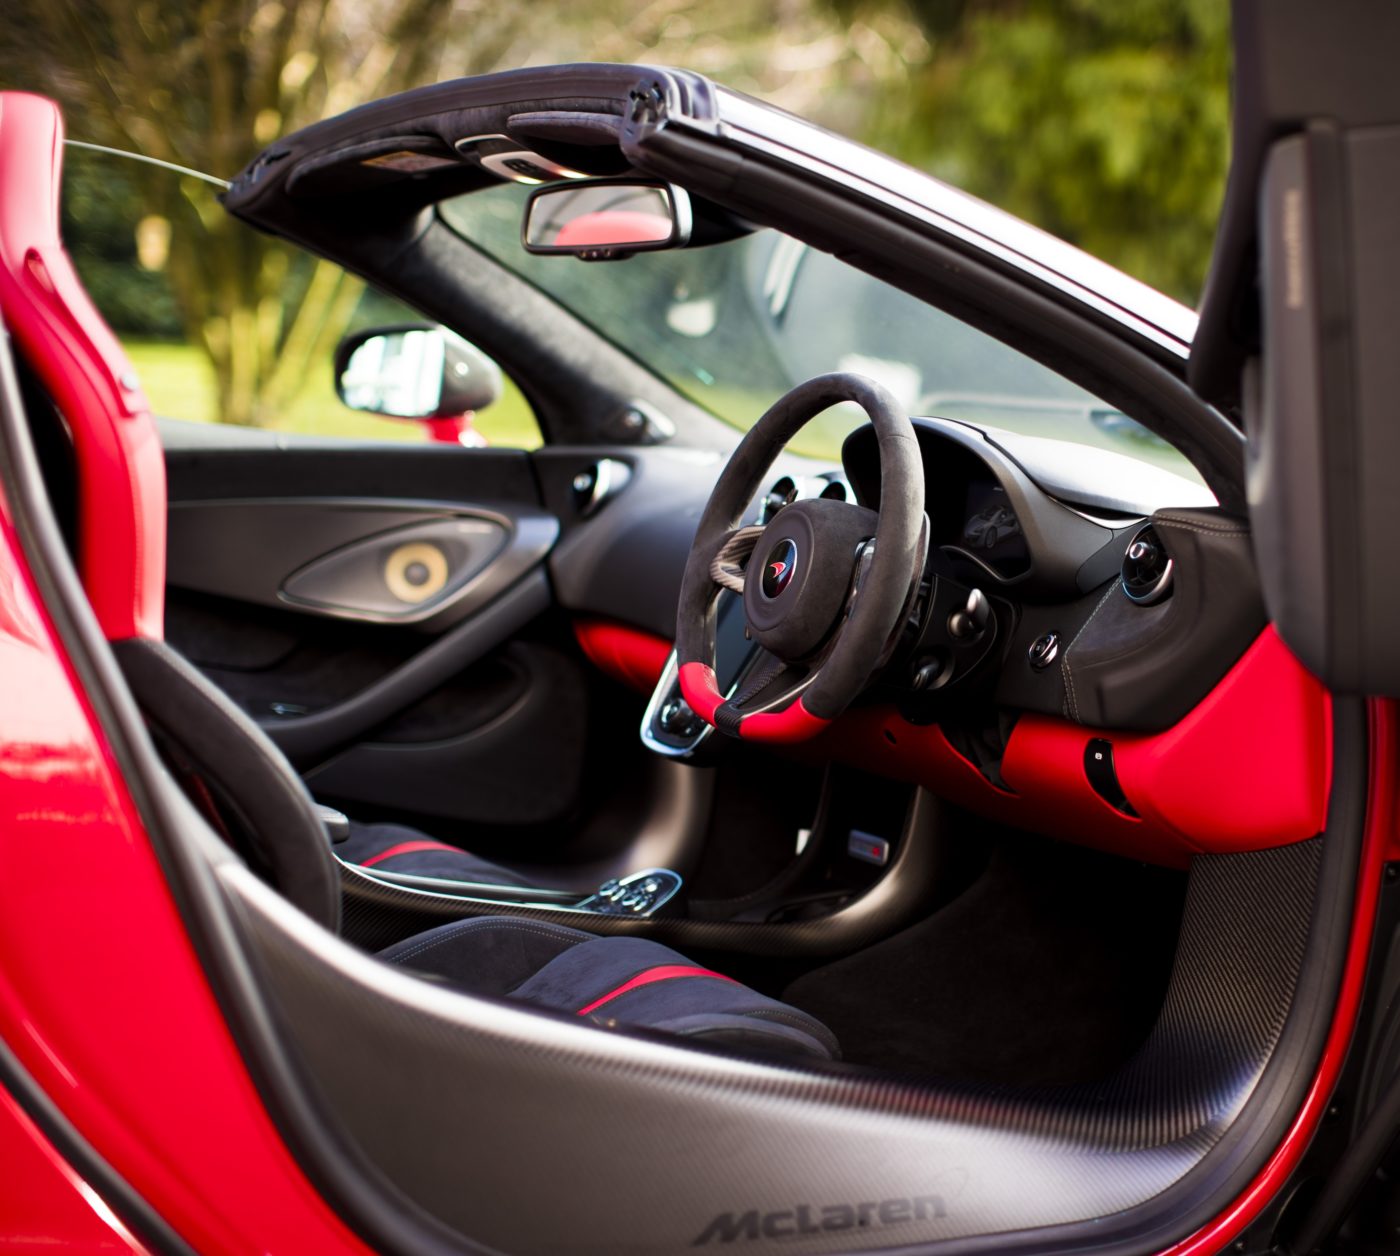 Easy entry is what makes the McLaren 570S Spider so popular.